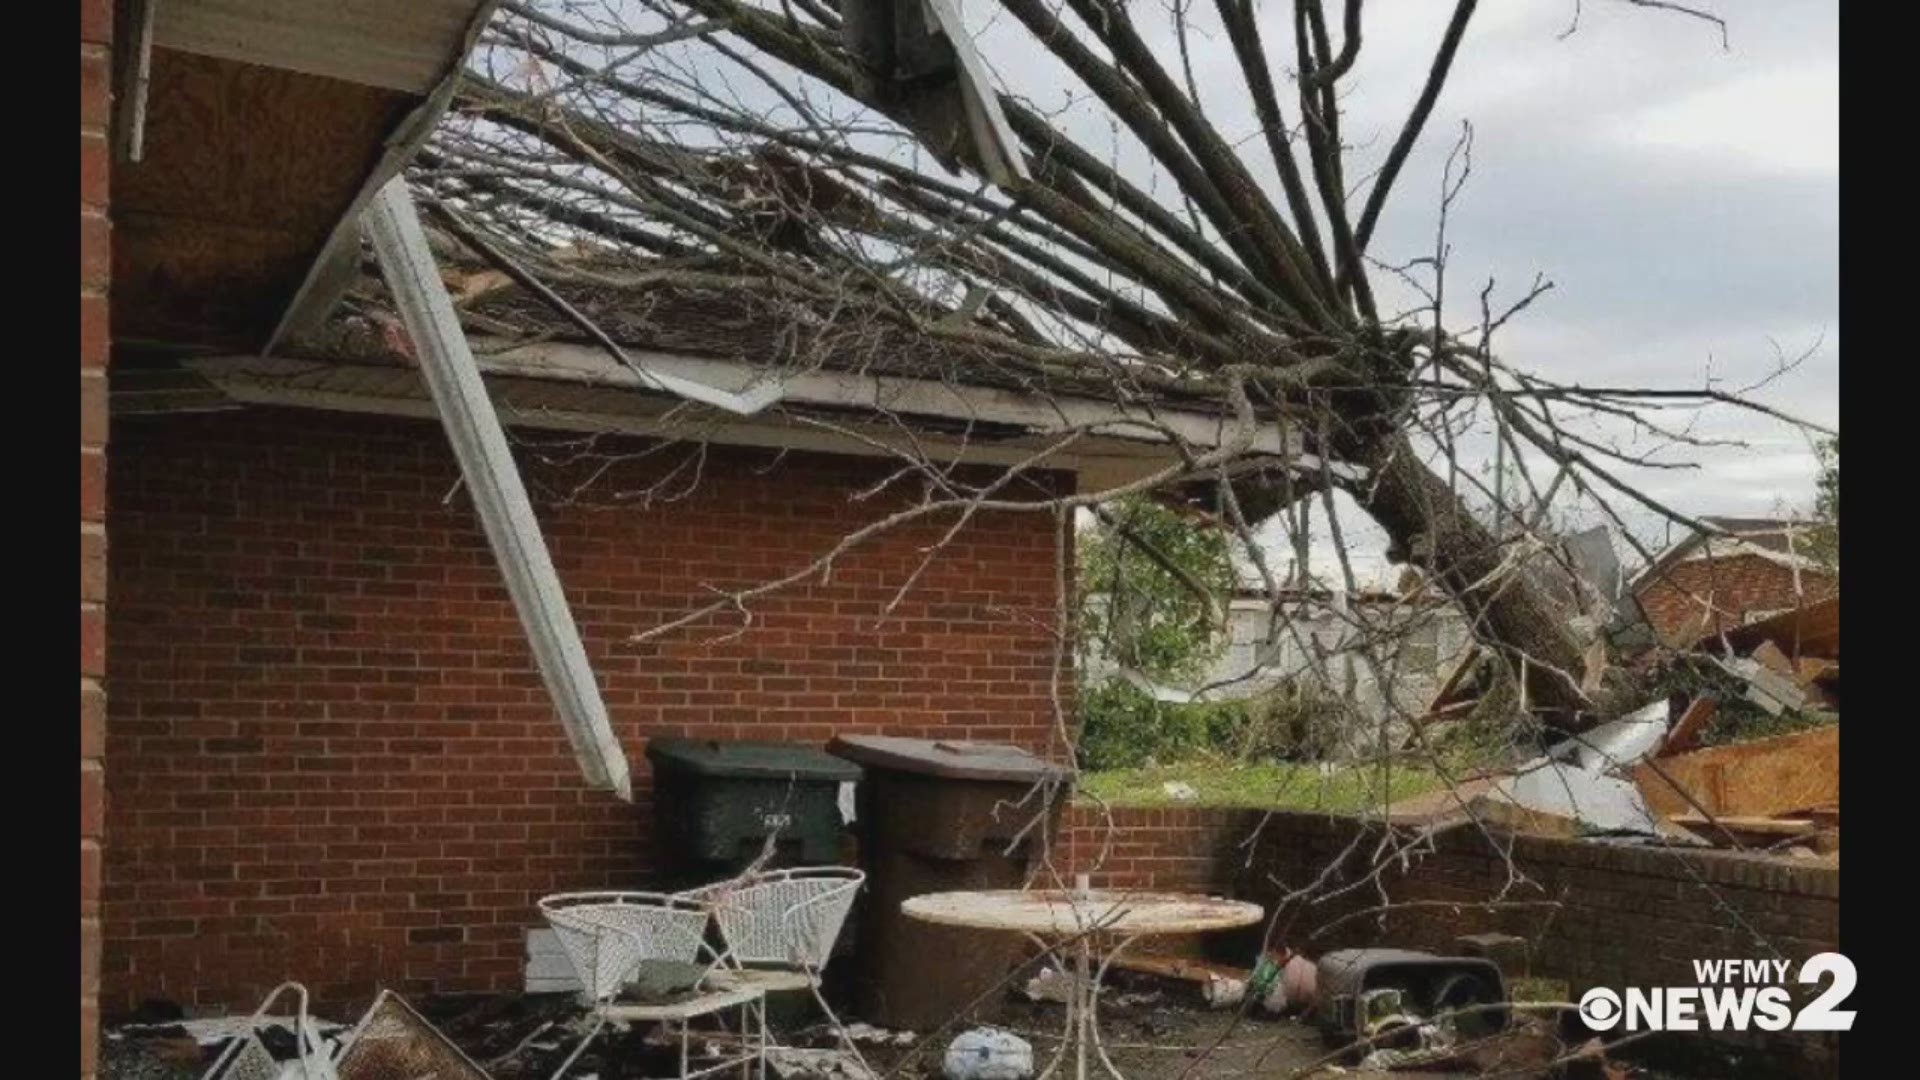 The 2018 tornado that tore through parts of Greensboro devastated Marie Sims' home. A year and 10 months later, she's home.